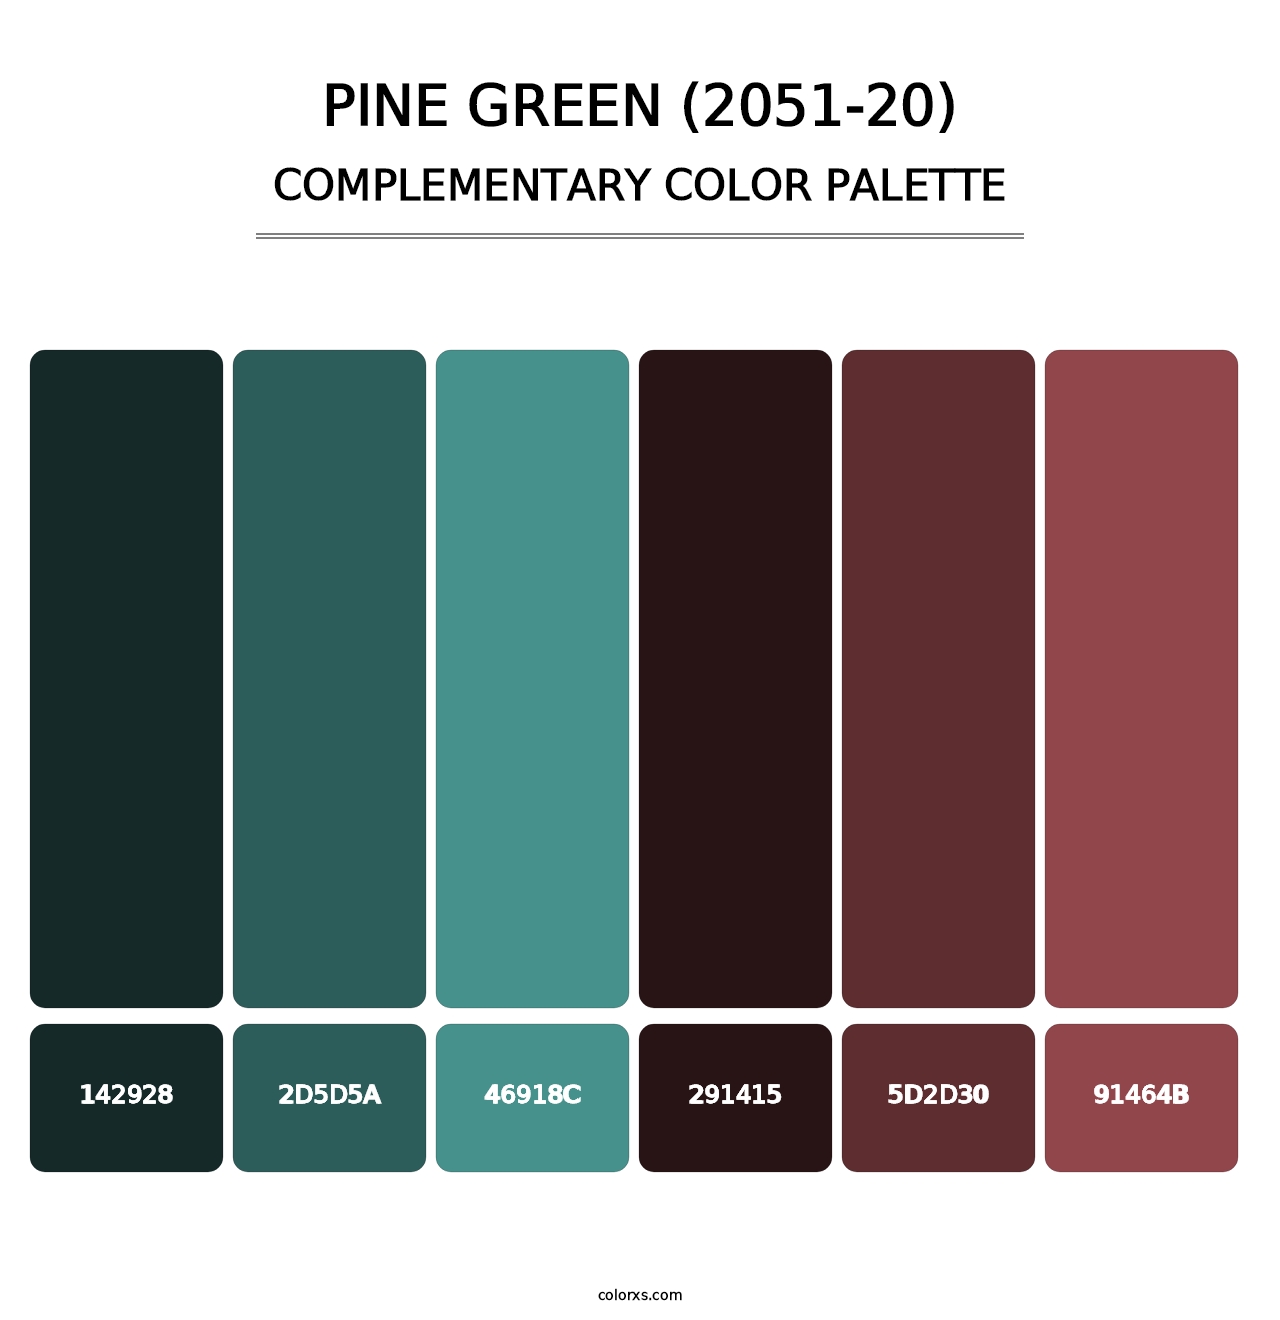 Pine Green (2051-20) - Complementary Color Palette